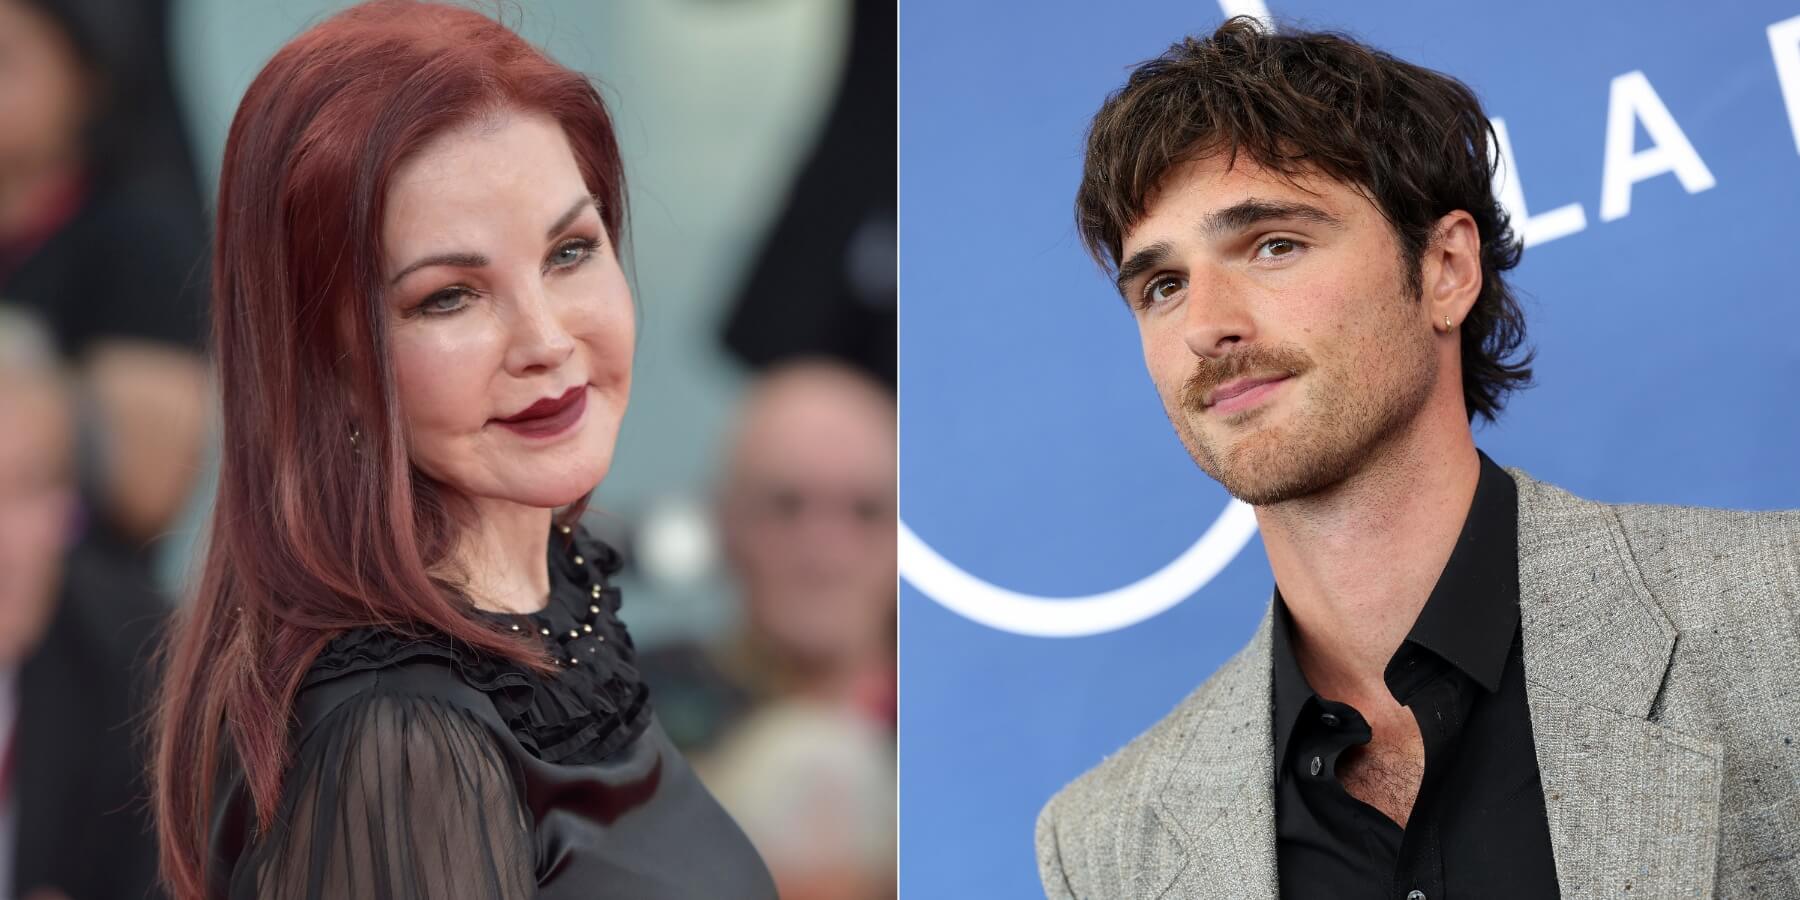 Priscilla Presley pictured in side-by-side photos alongside Jacob Elordi, who plays Elvis Presley in the film 'Priscilla.'